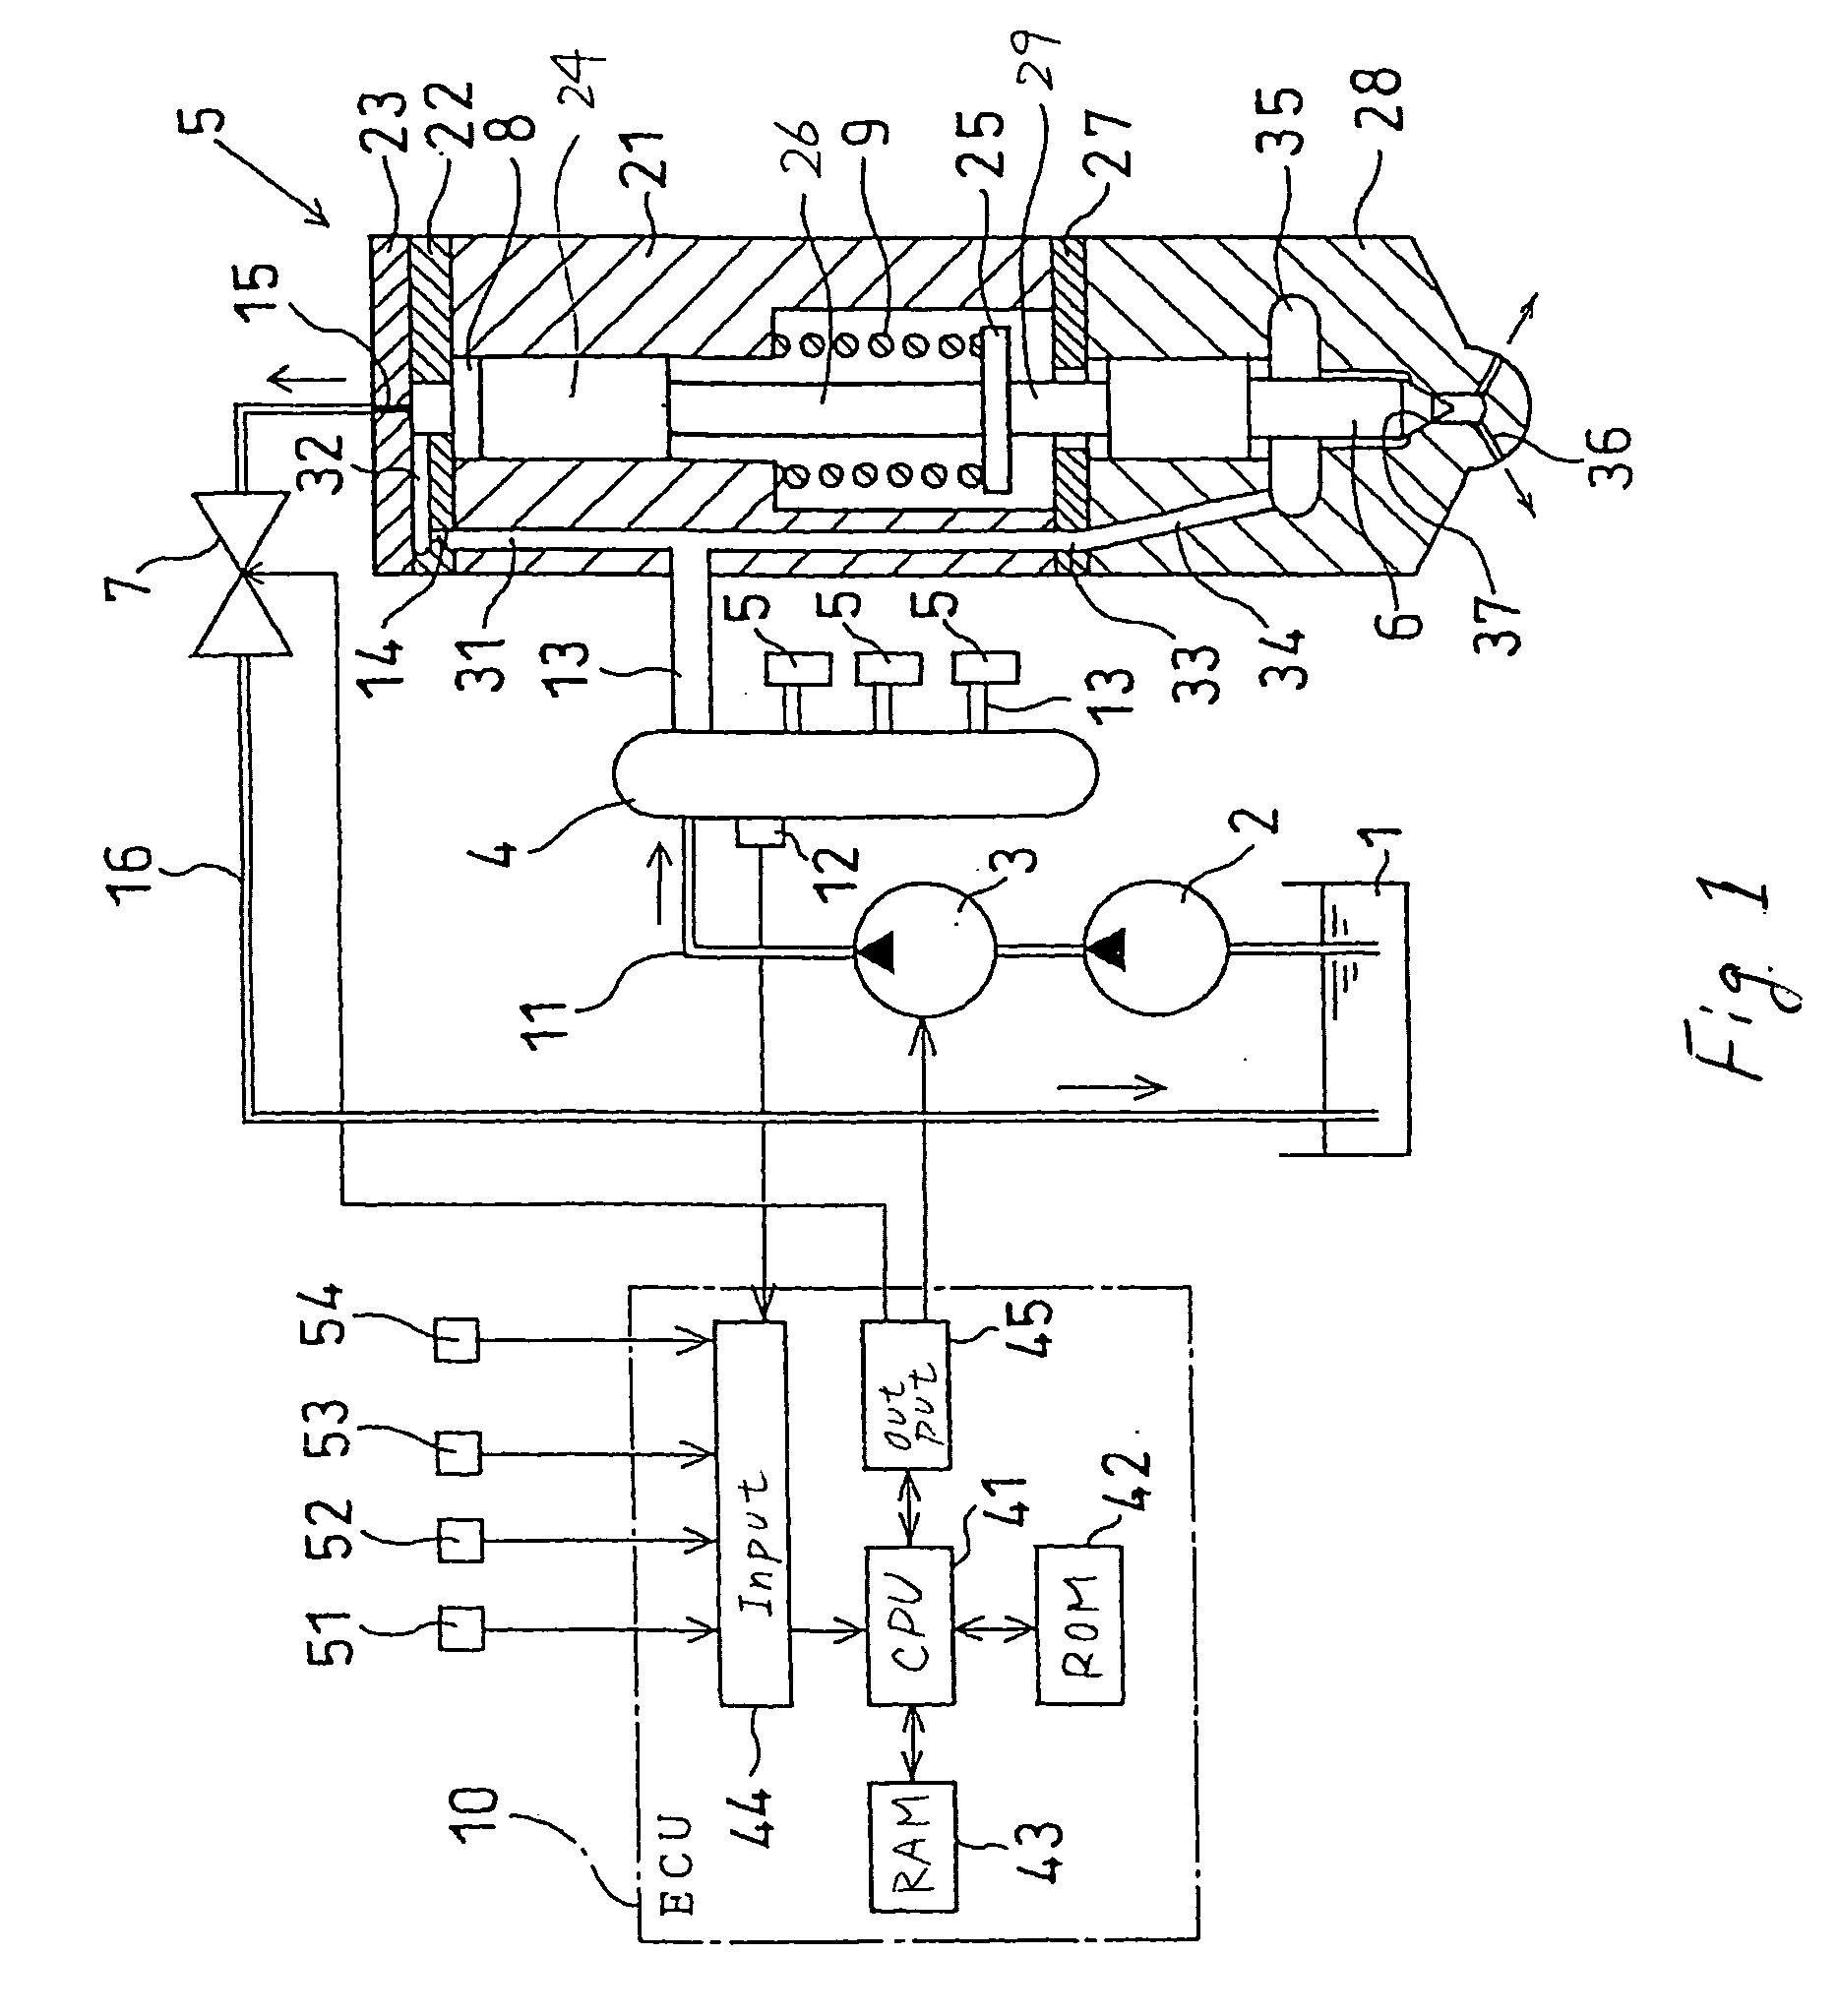 Accumulator fuel injection apparatus compensating for injector individual variability